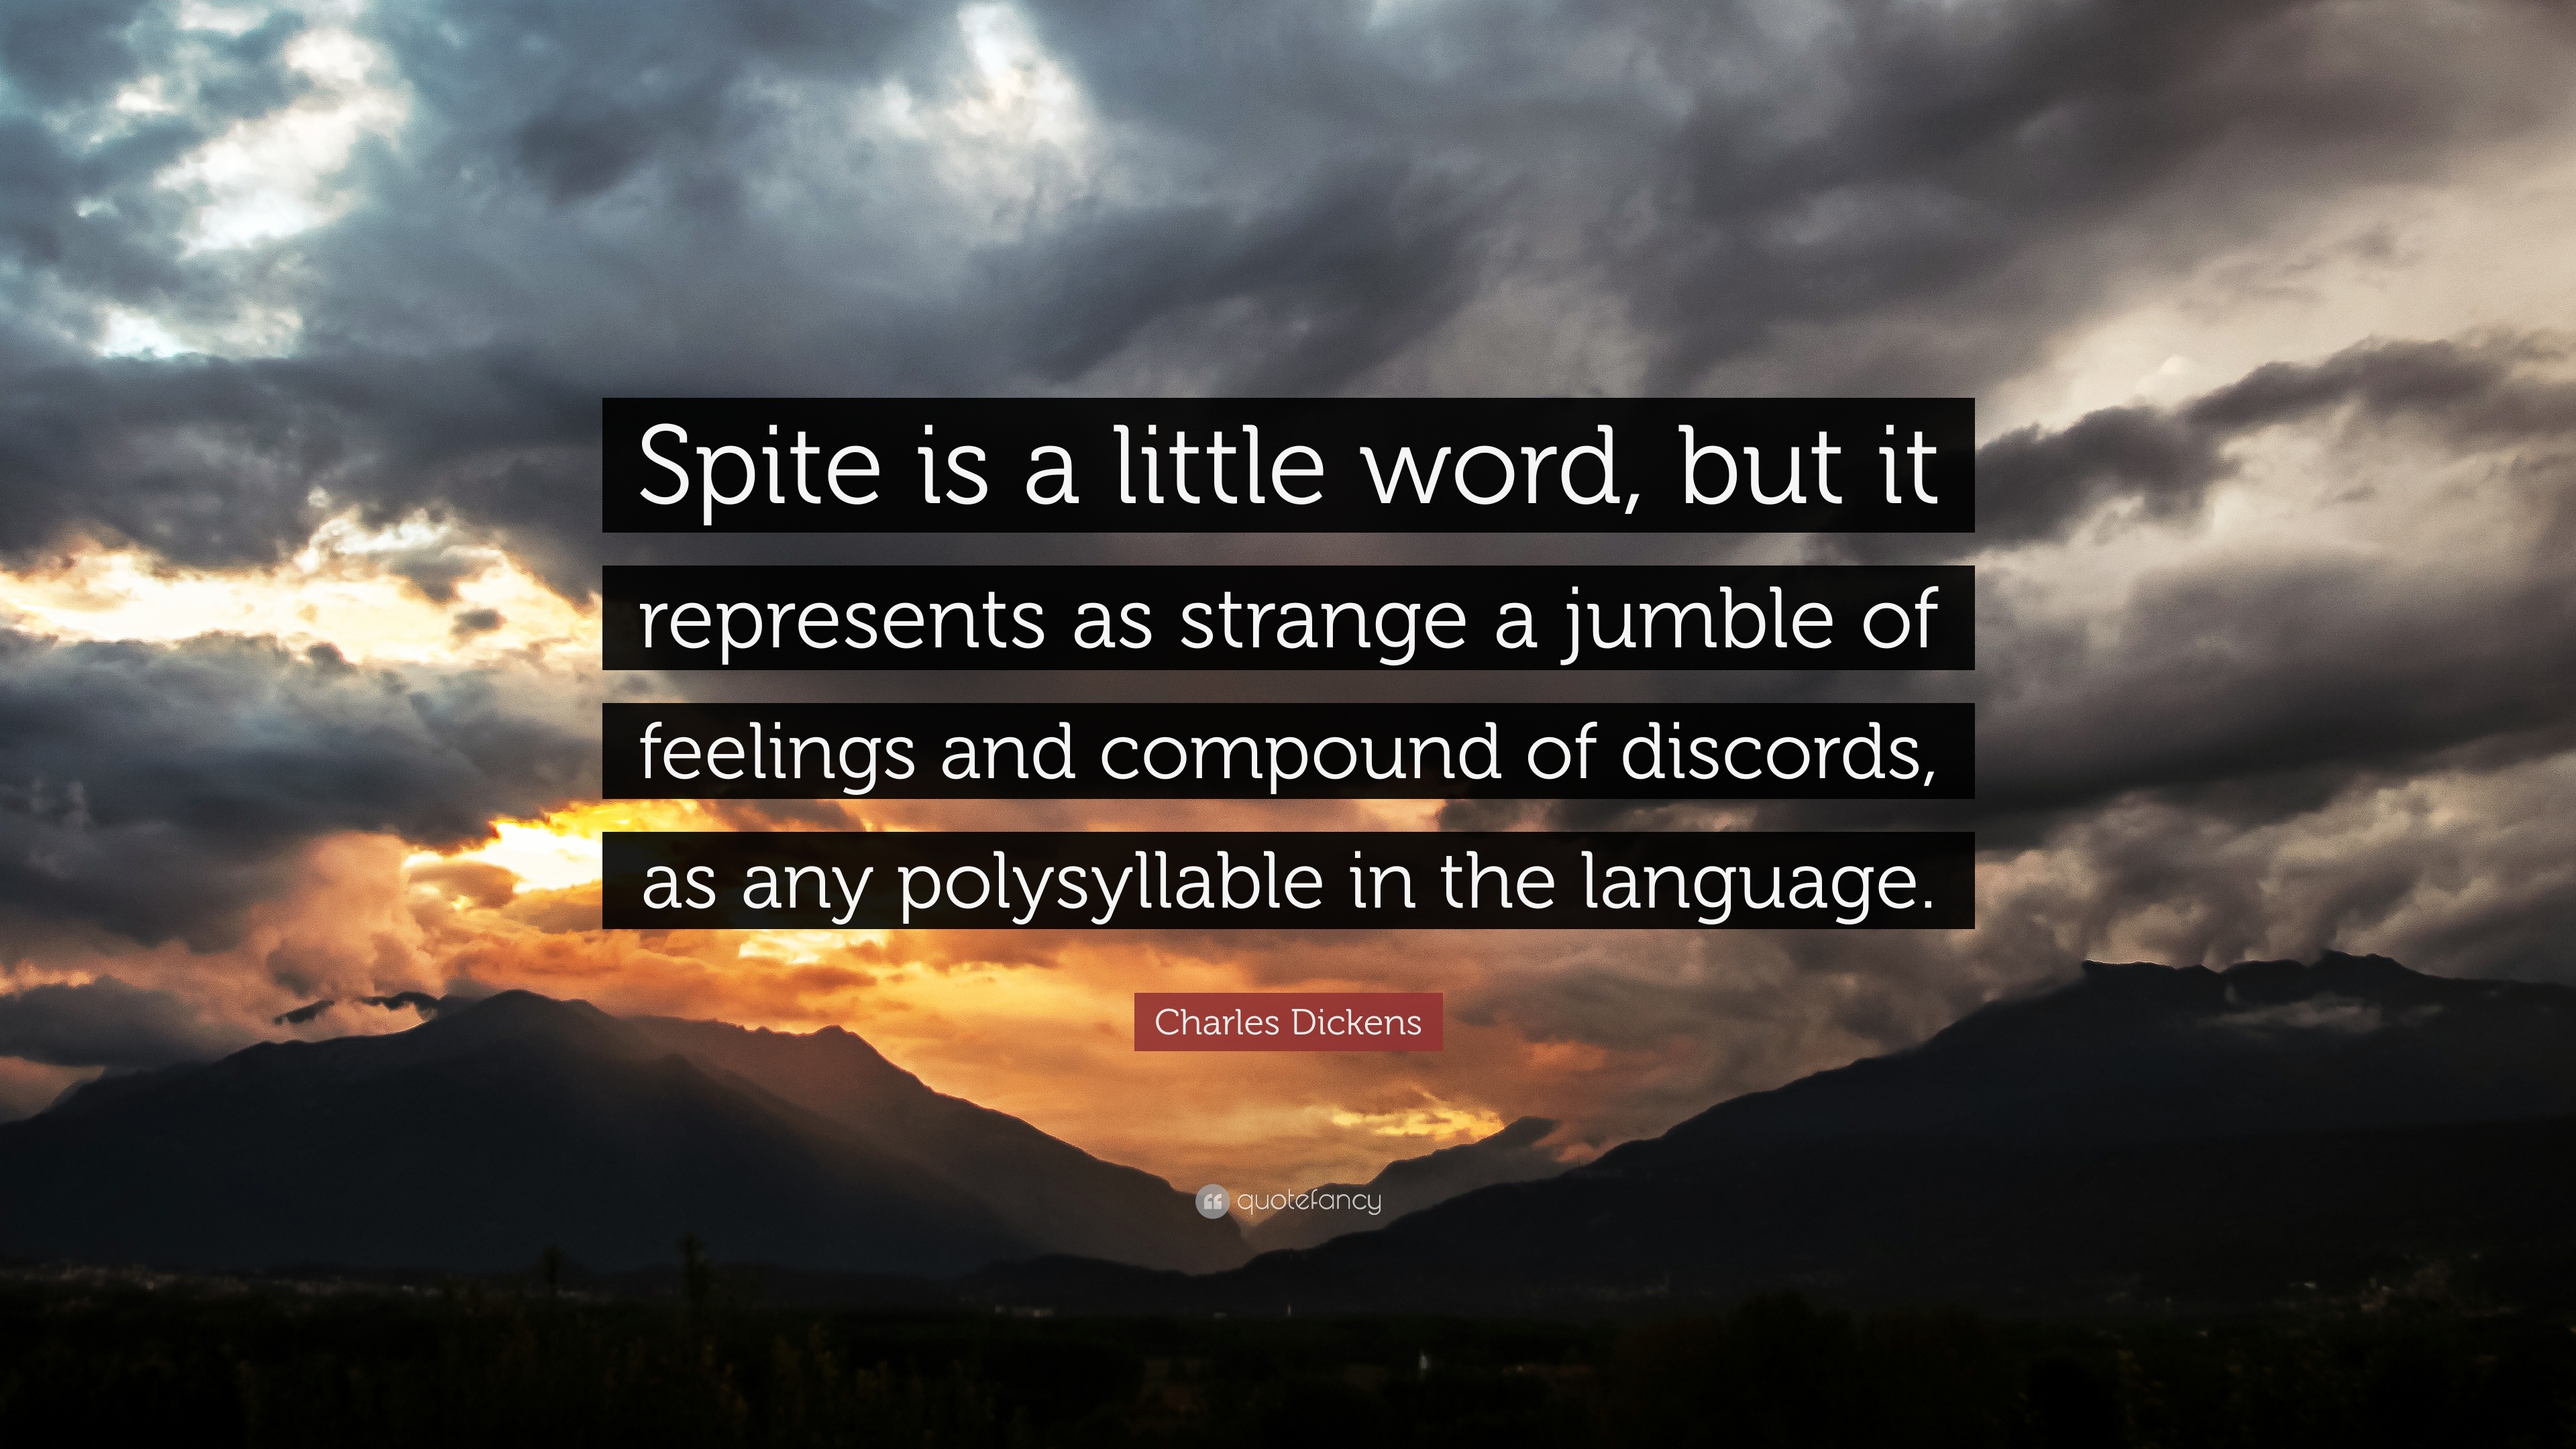 Charles Dickens Quote: "Spite is a little word, but it ...